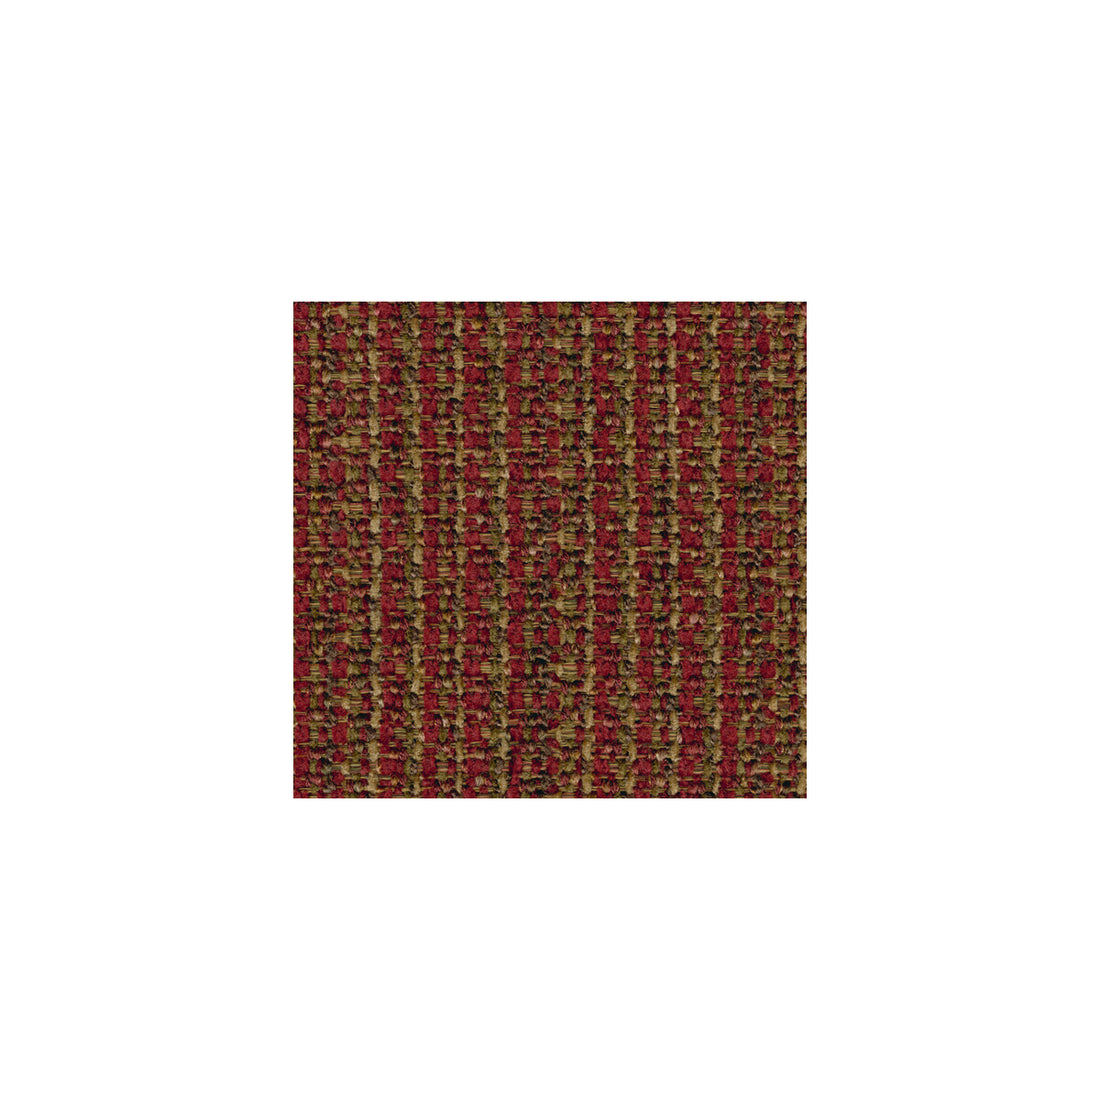 Chenille Tweed fabric in sangria color - pattern 30962.940.0 - by Kravet Smart in the Gis collection